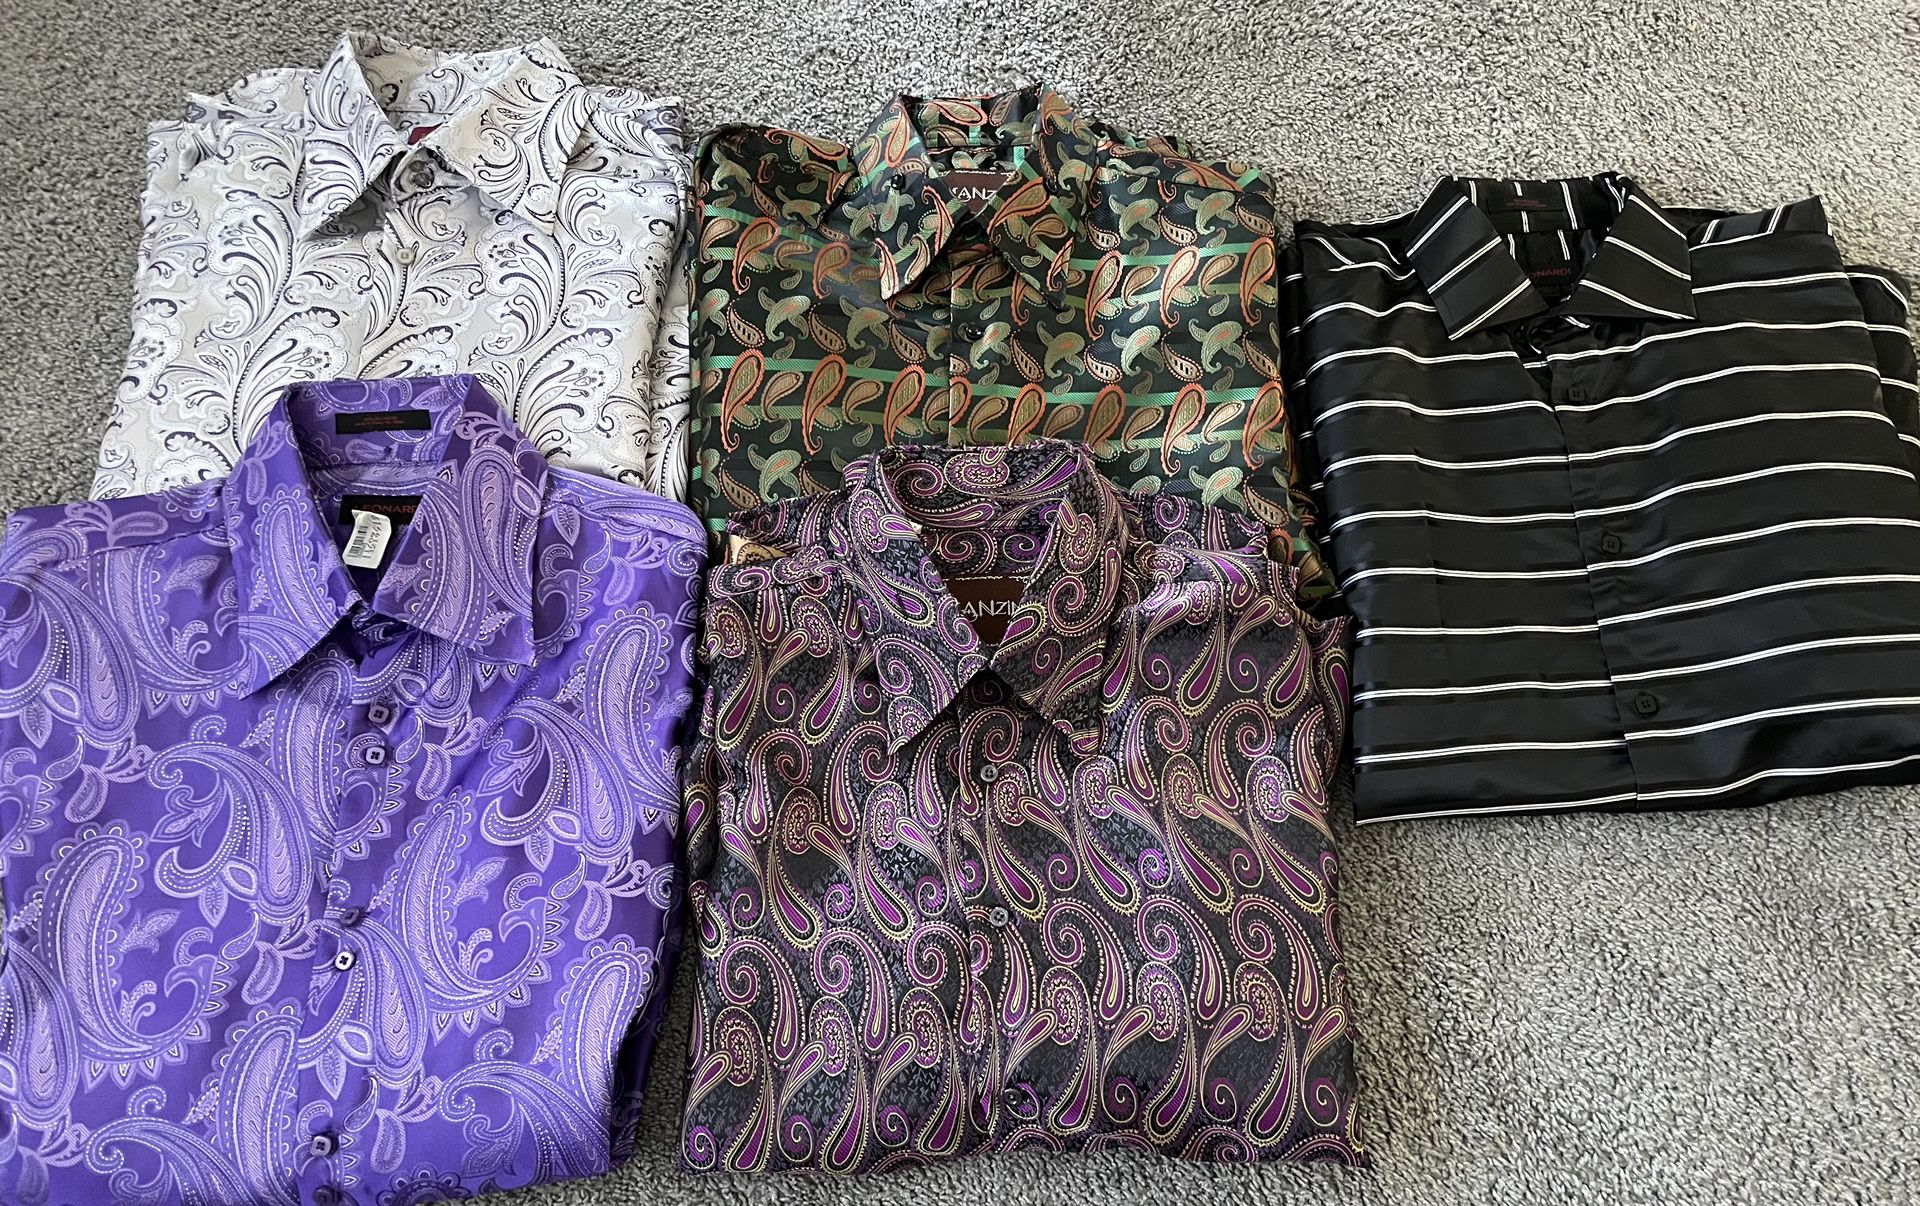 Men’s French Cuff Dress Shirts (priced separately)